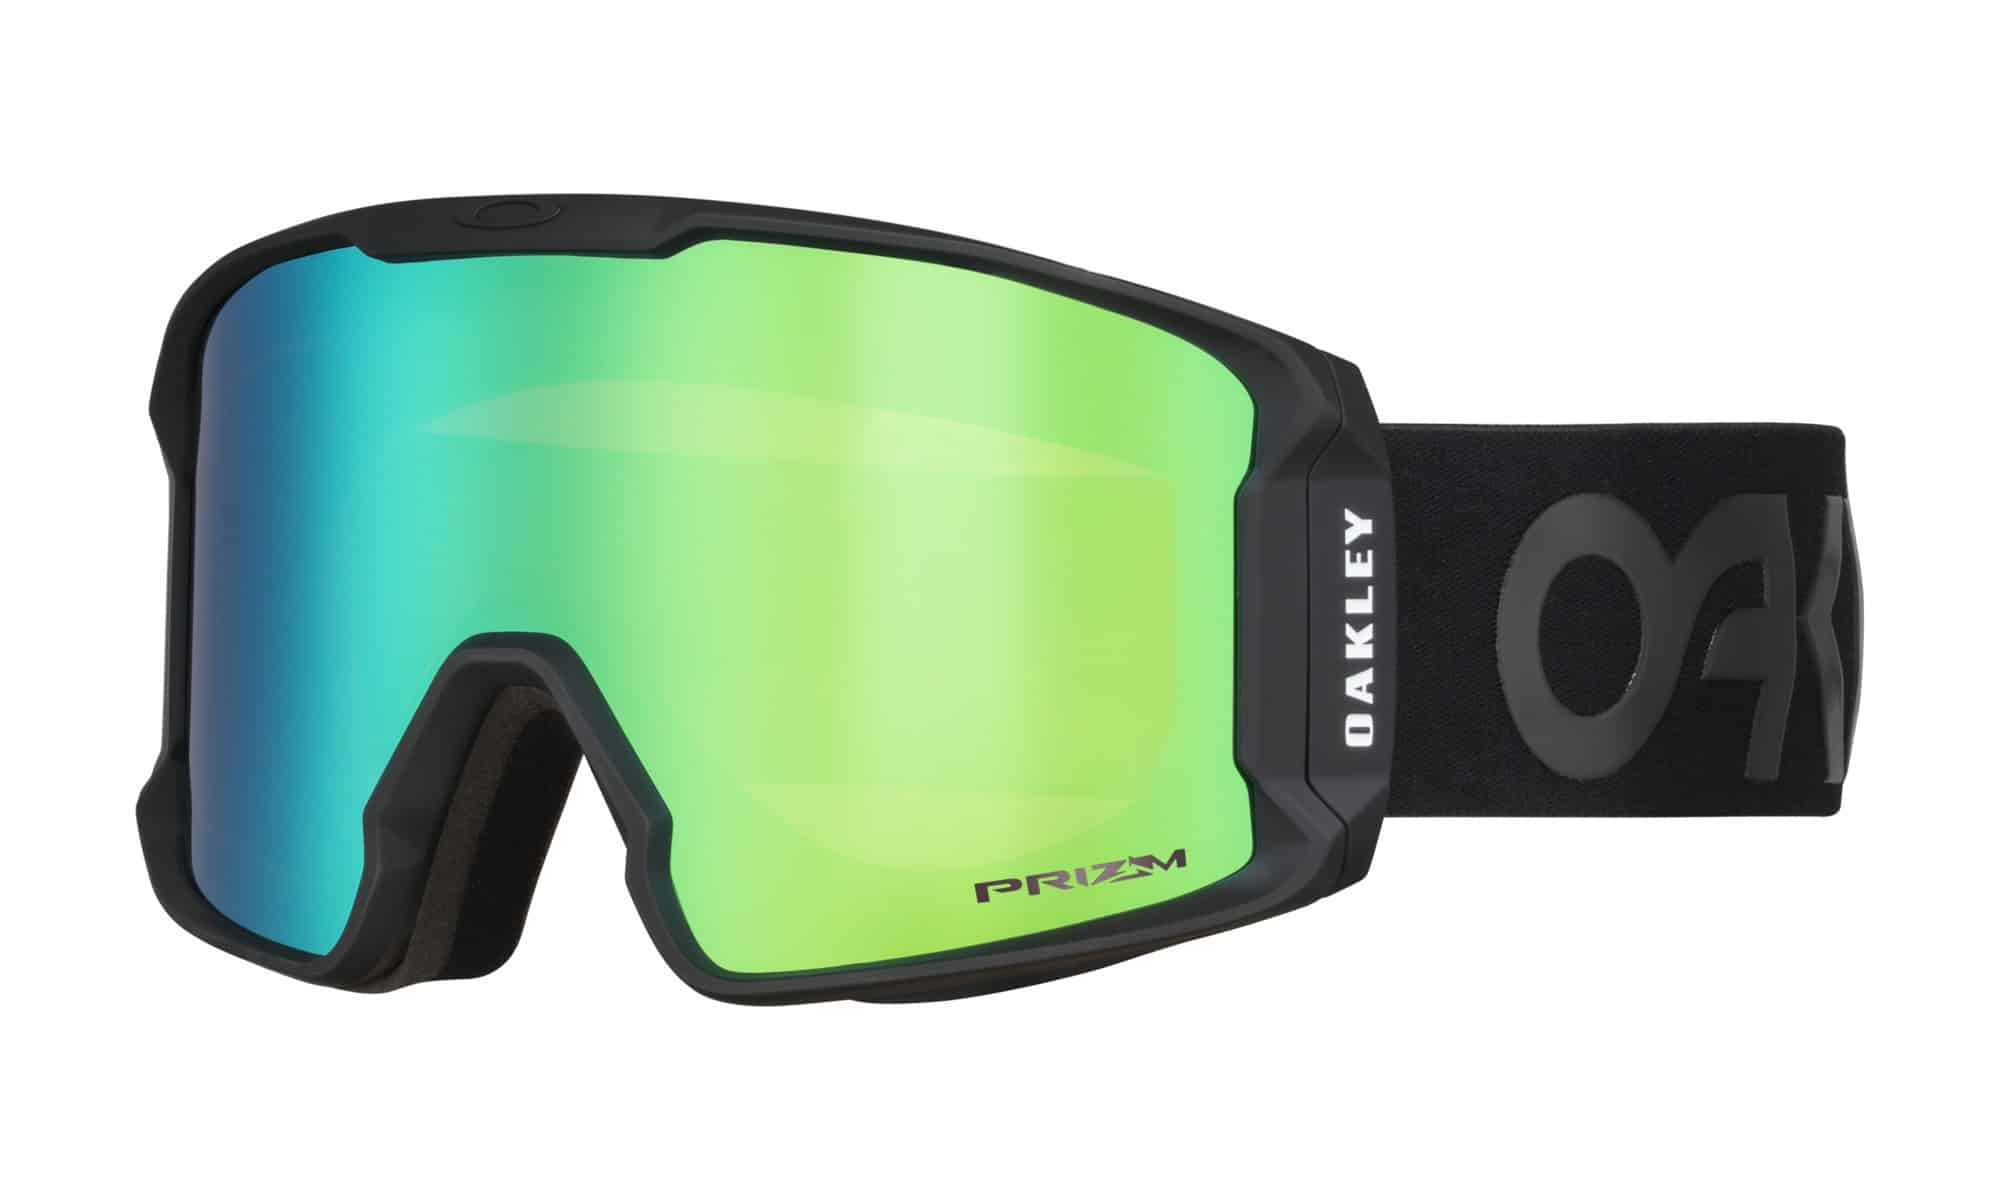 oakley prizm goggles review